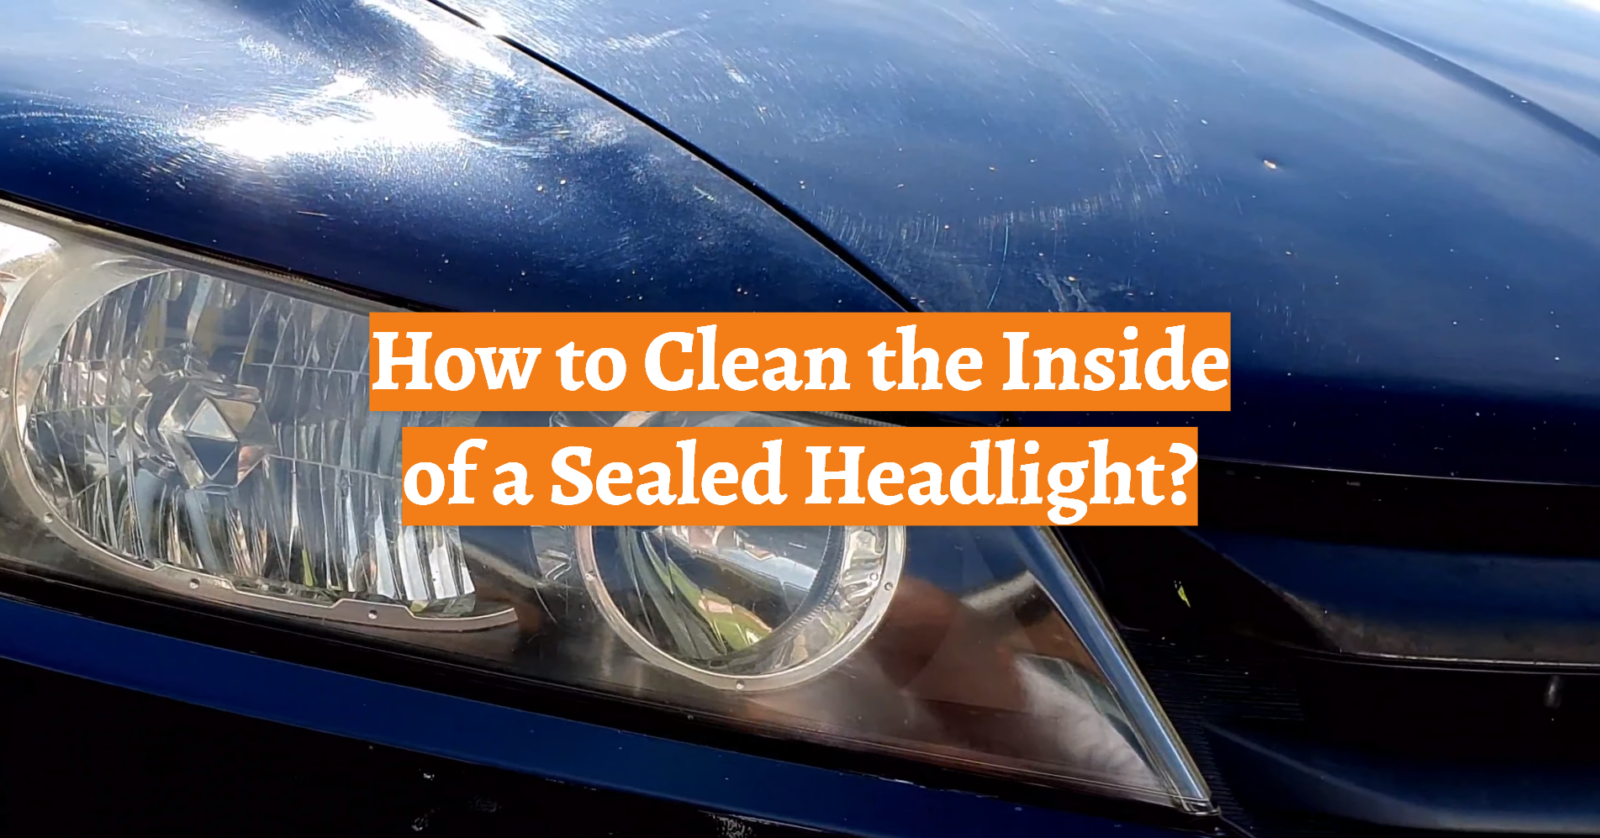 How to Clean the Inside of a Sealed Headlight?